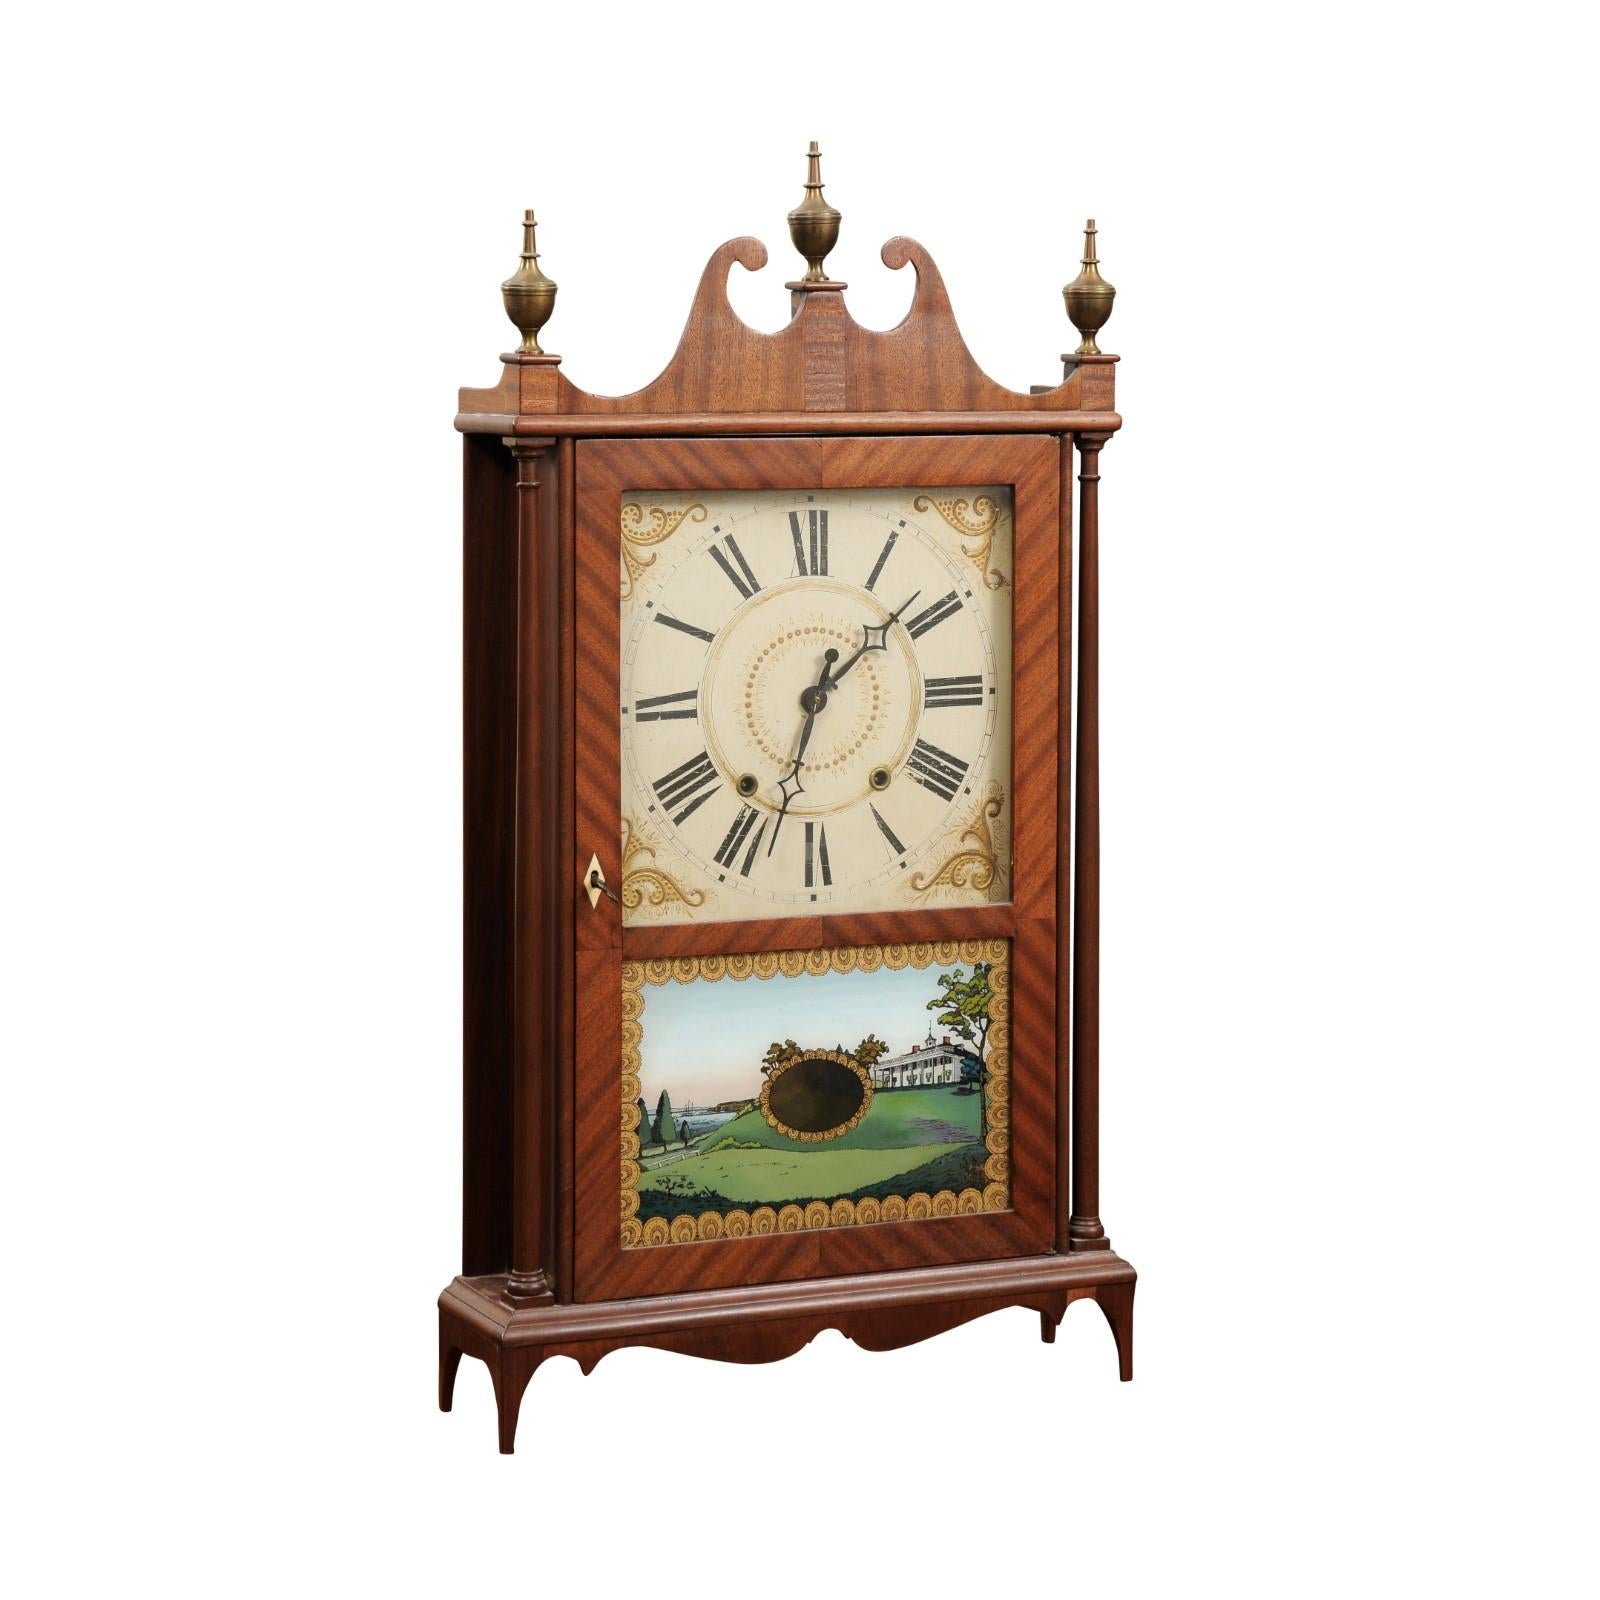 Early 19th Century American Pillar & Scroll Clock in Mahogany with Eglomise Painted Landscape Scene